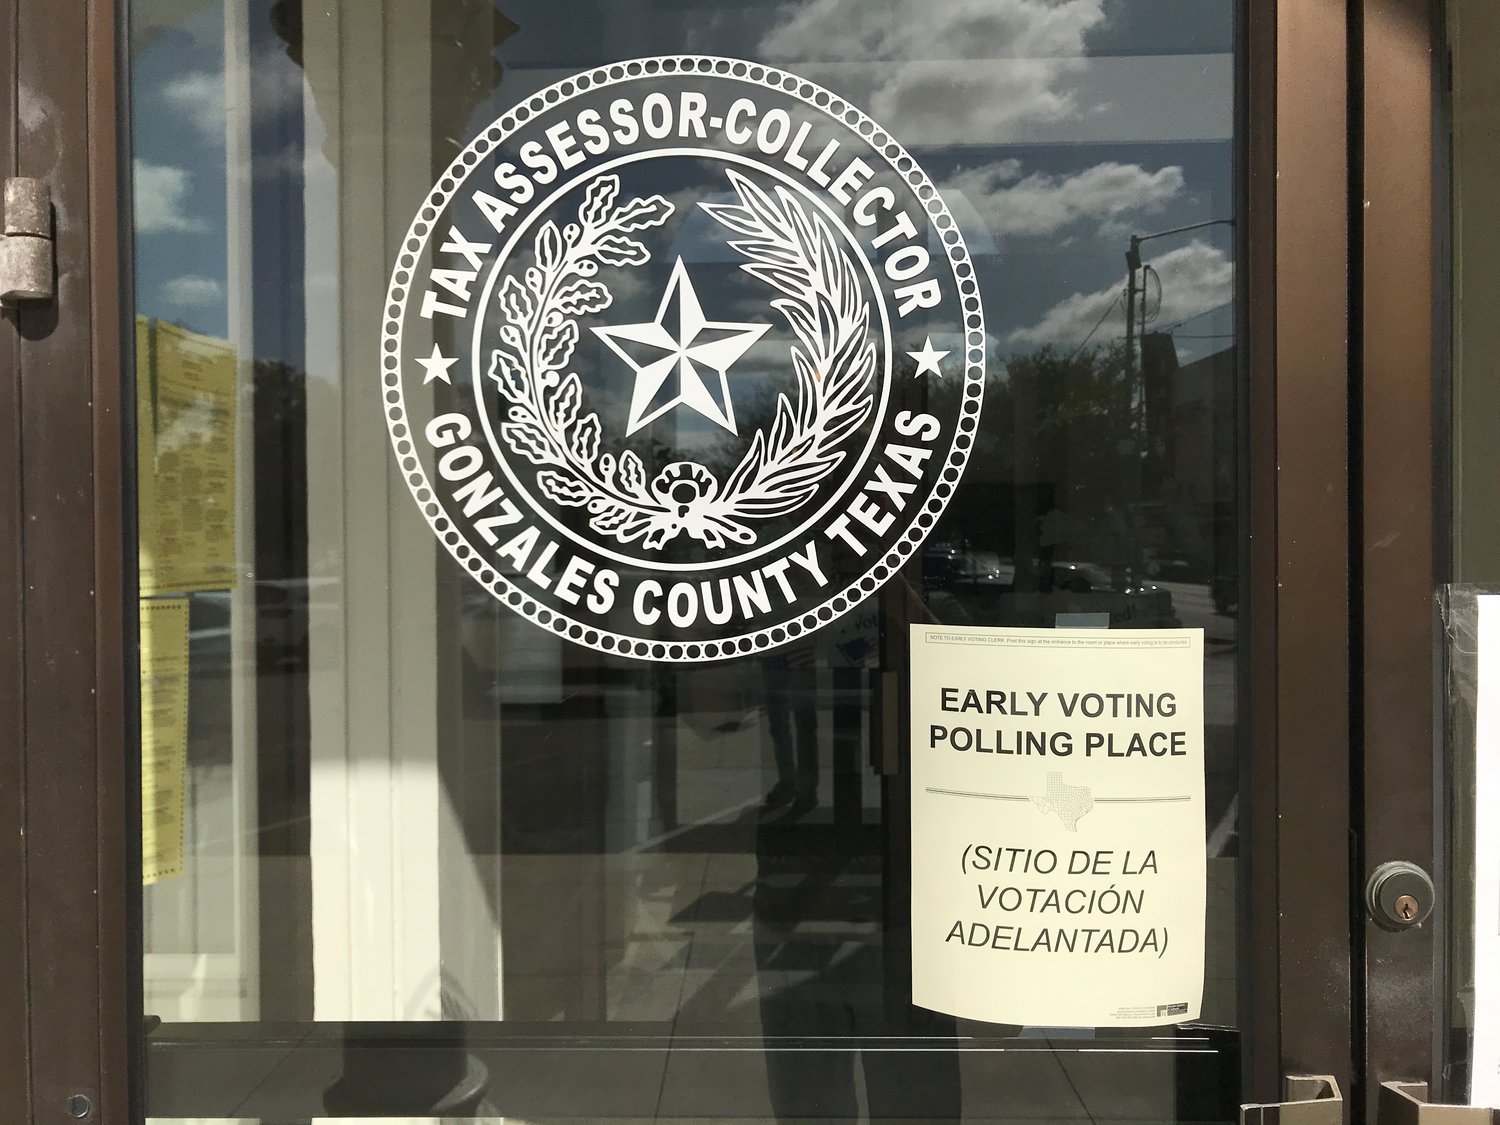 Randle Rather is one of a few locations that voters can cast ballots at during both the remaining days of early voting and election day itself on Nov. 5.